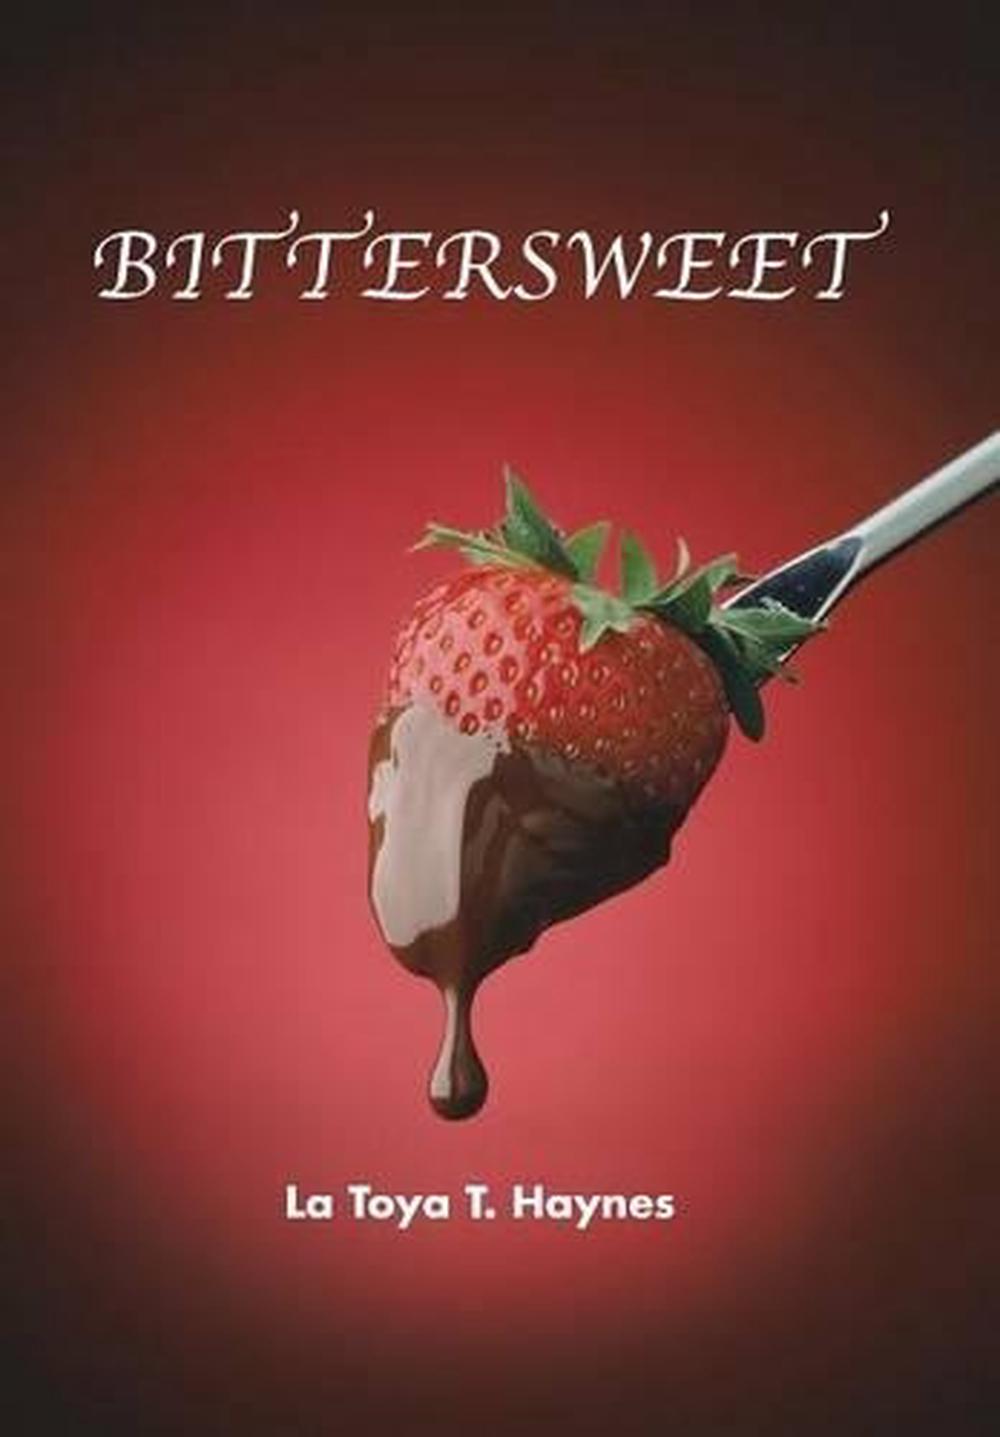 bittersweet book by colleen mccullough